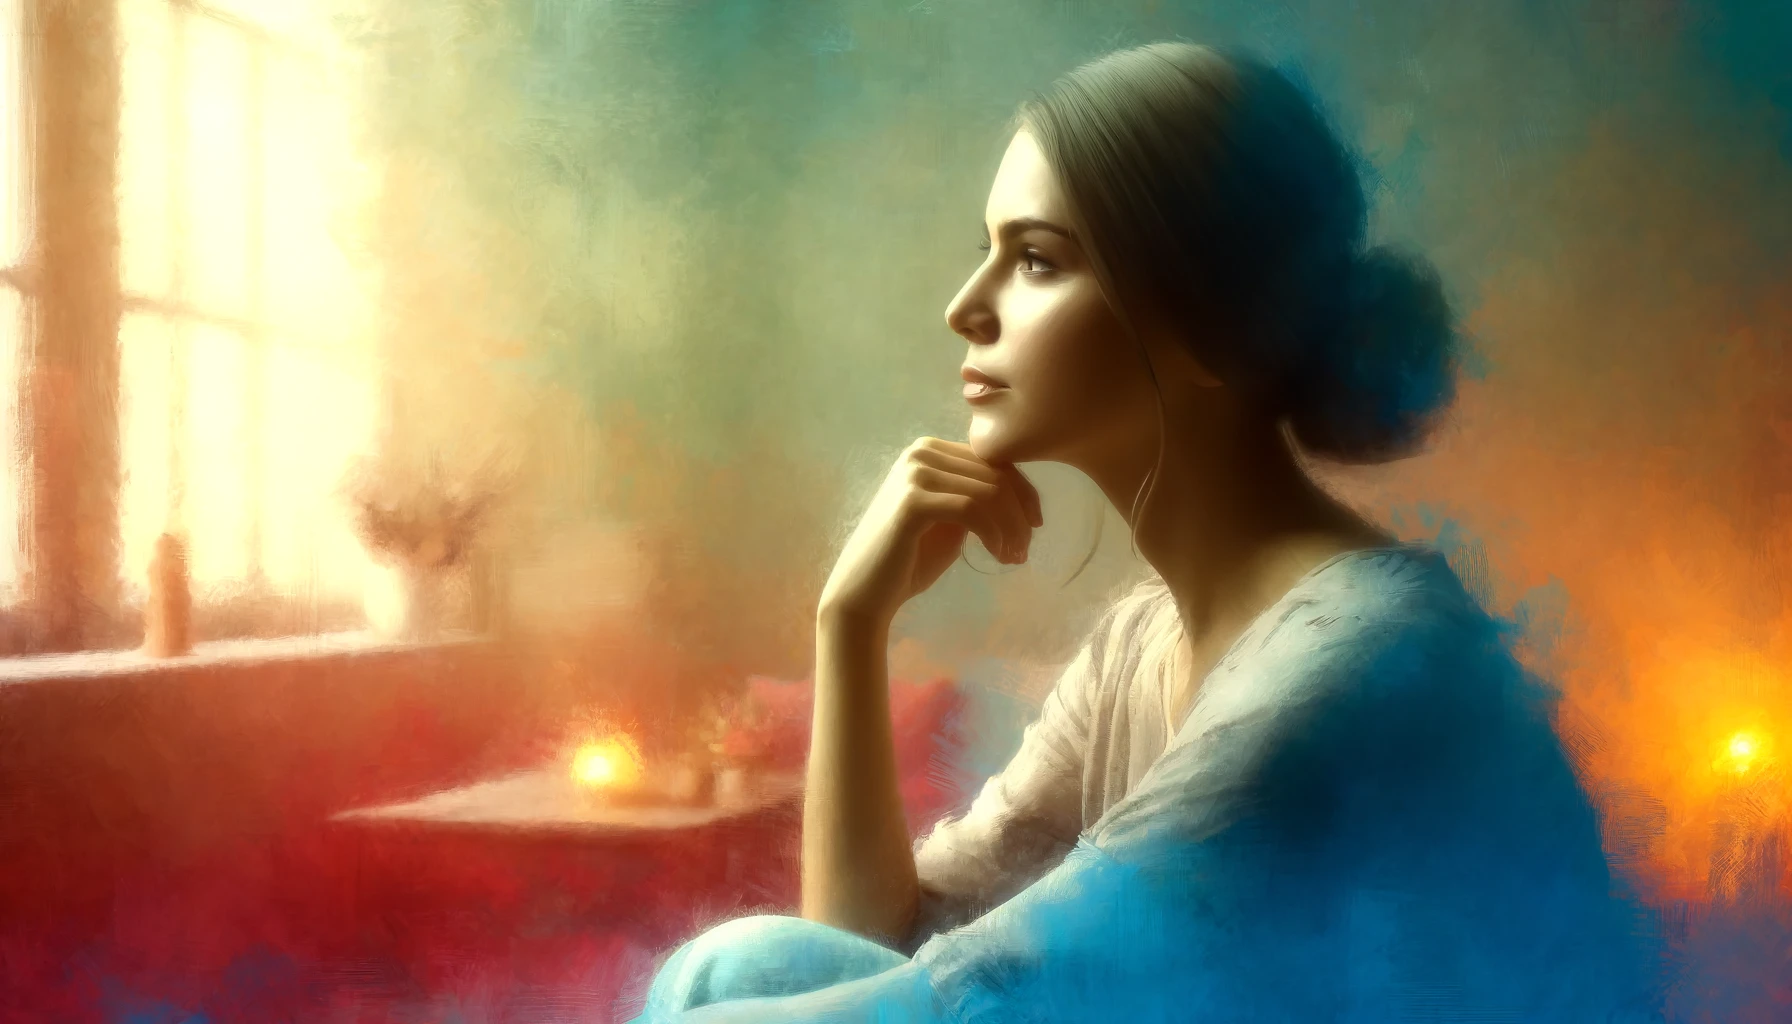 "Thoughtful woman in colorful sitting room, trusted psychic deep in contemplation"